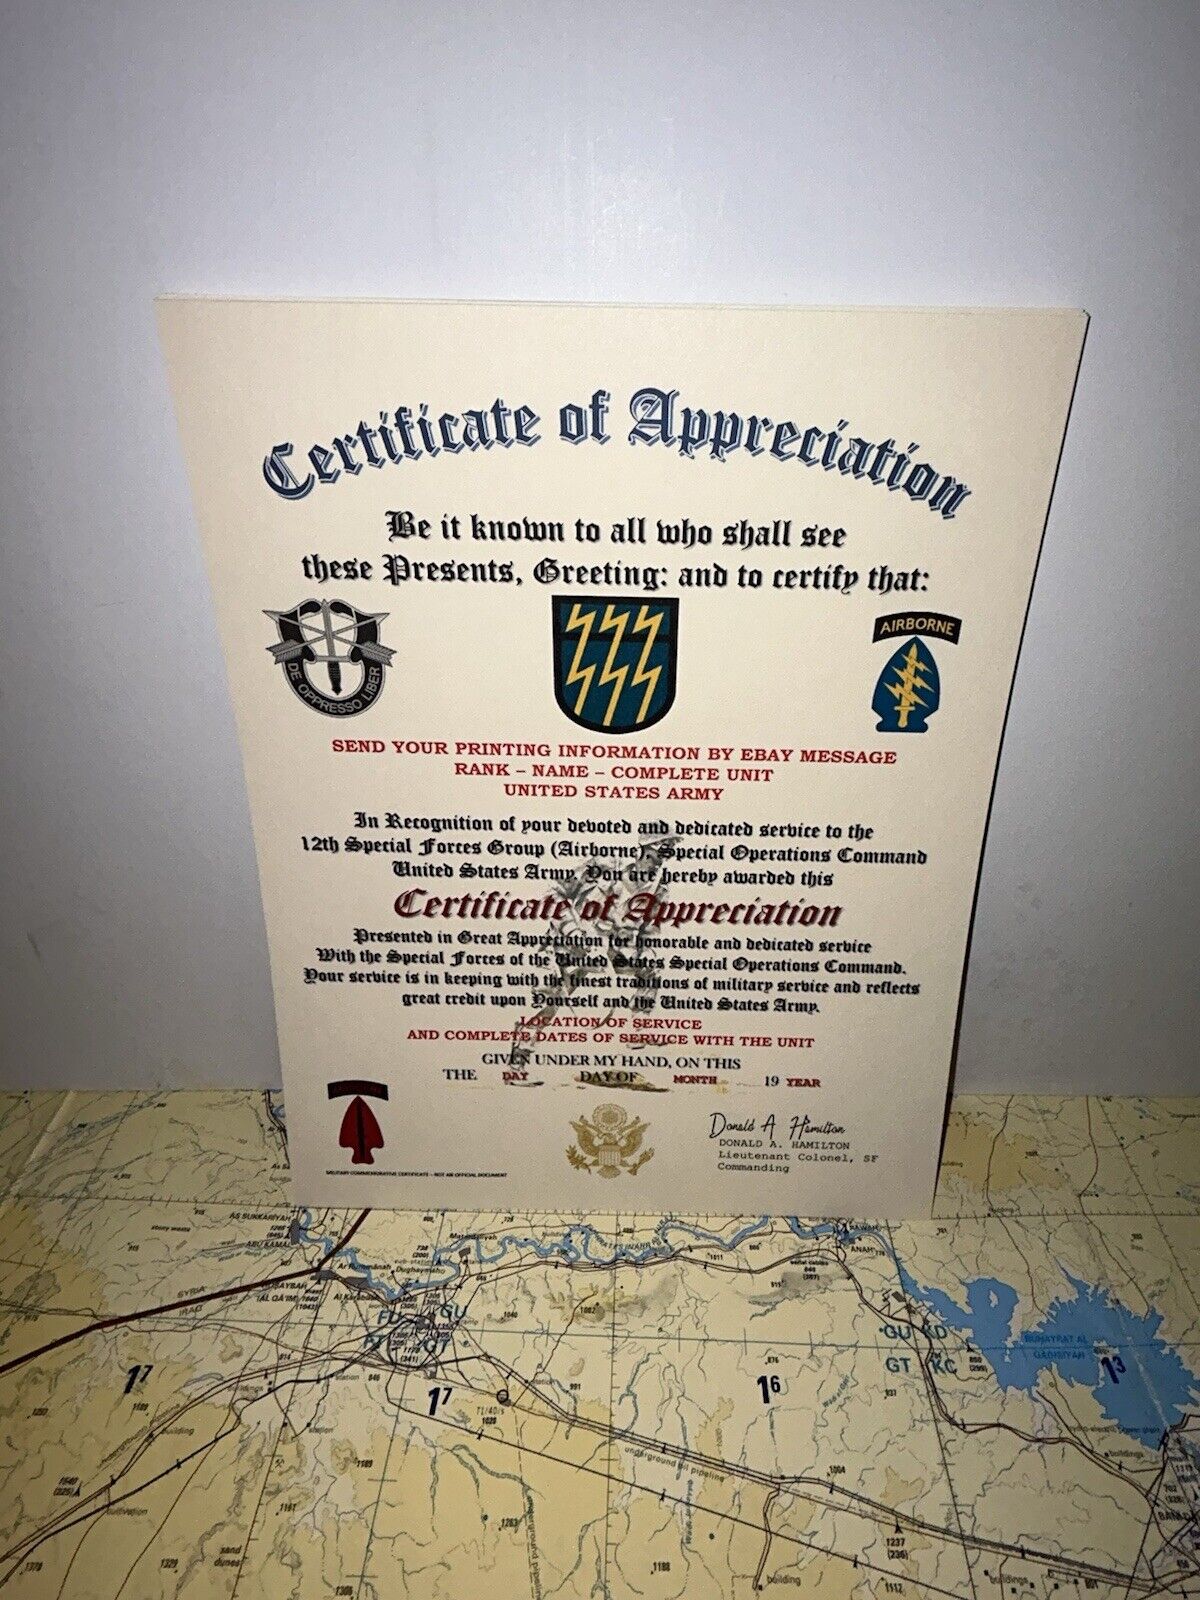 U.S. ARMY - 12TH SPECIAL FORCES GROUP (ABN) CERTIFICATE OF APPRECIATION